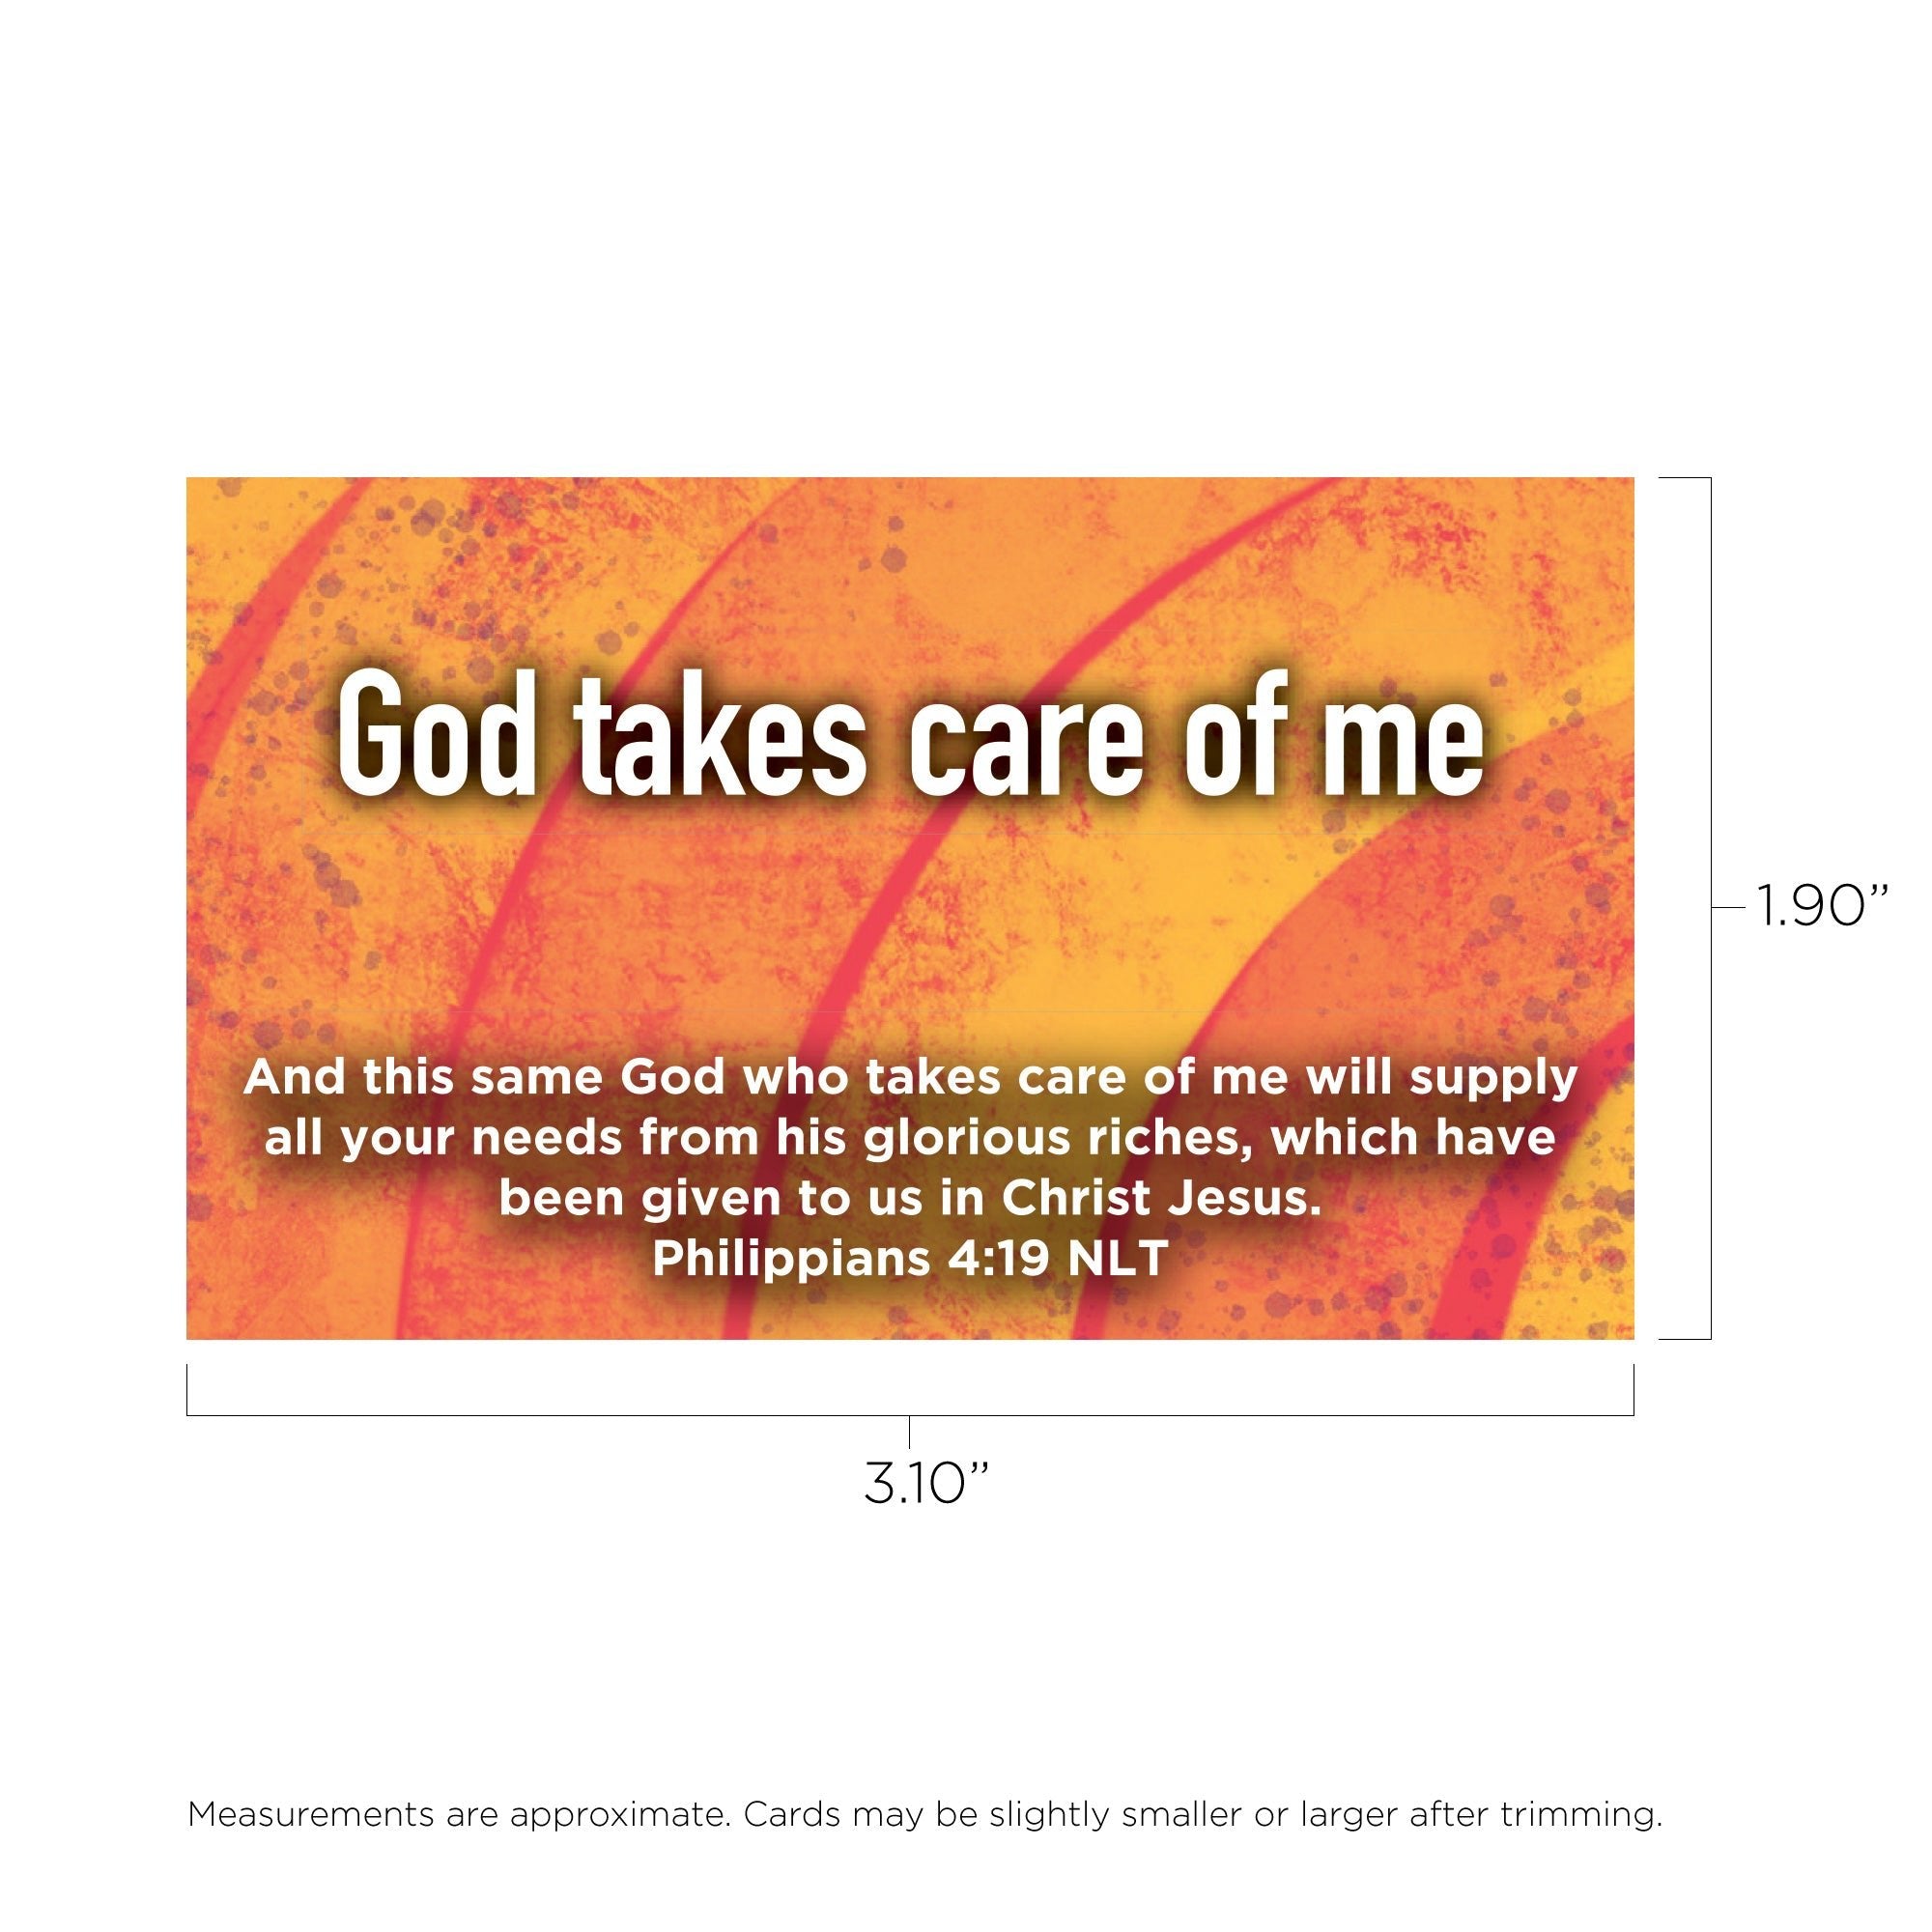 Children and Youth, Pass Along Scripture Cards, God Takes Care of Me, Philippians 4:19 Pack of 25